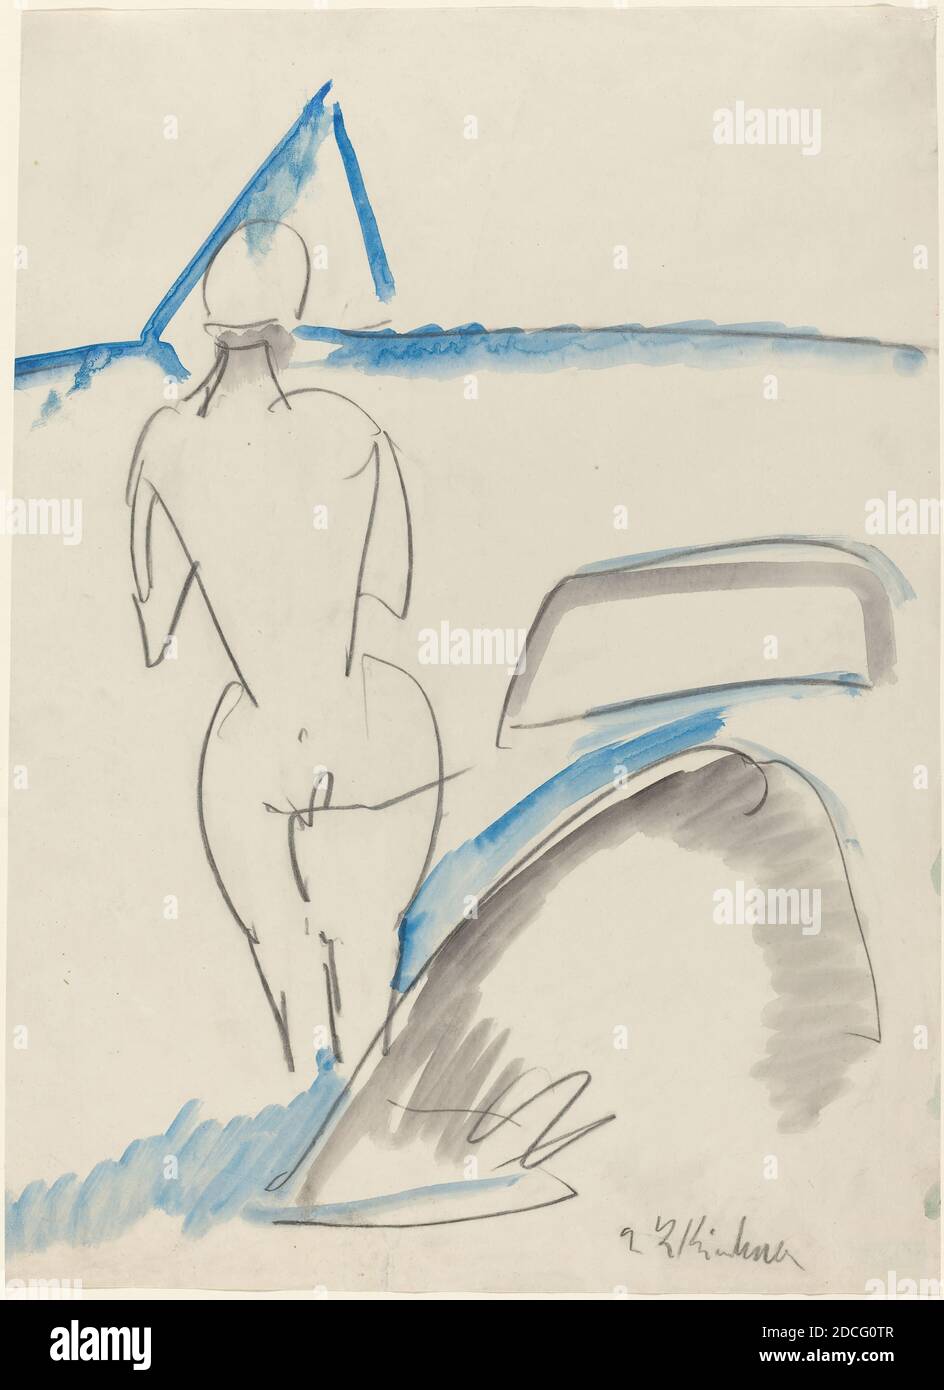 Ernst Ludwig Kirchner, (artist), German, 1880 - 1938, Bather on the Beach, 1912/1913, black crayon with blue and gray wash, overall: 43.4 x 31.8 cm (17 1/16 x 12 1/2 in Stock Photo